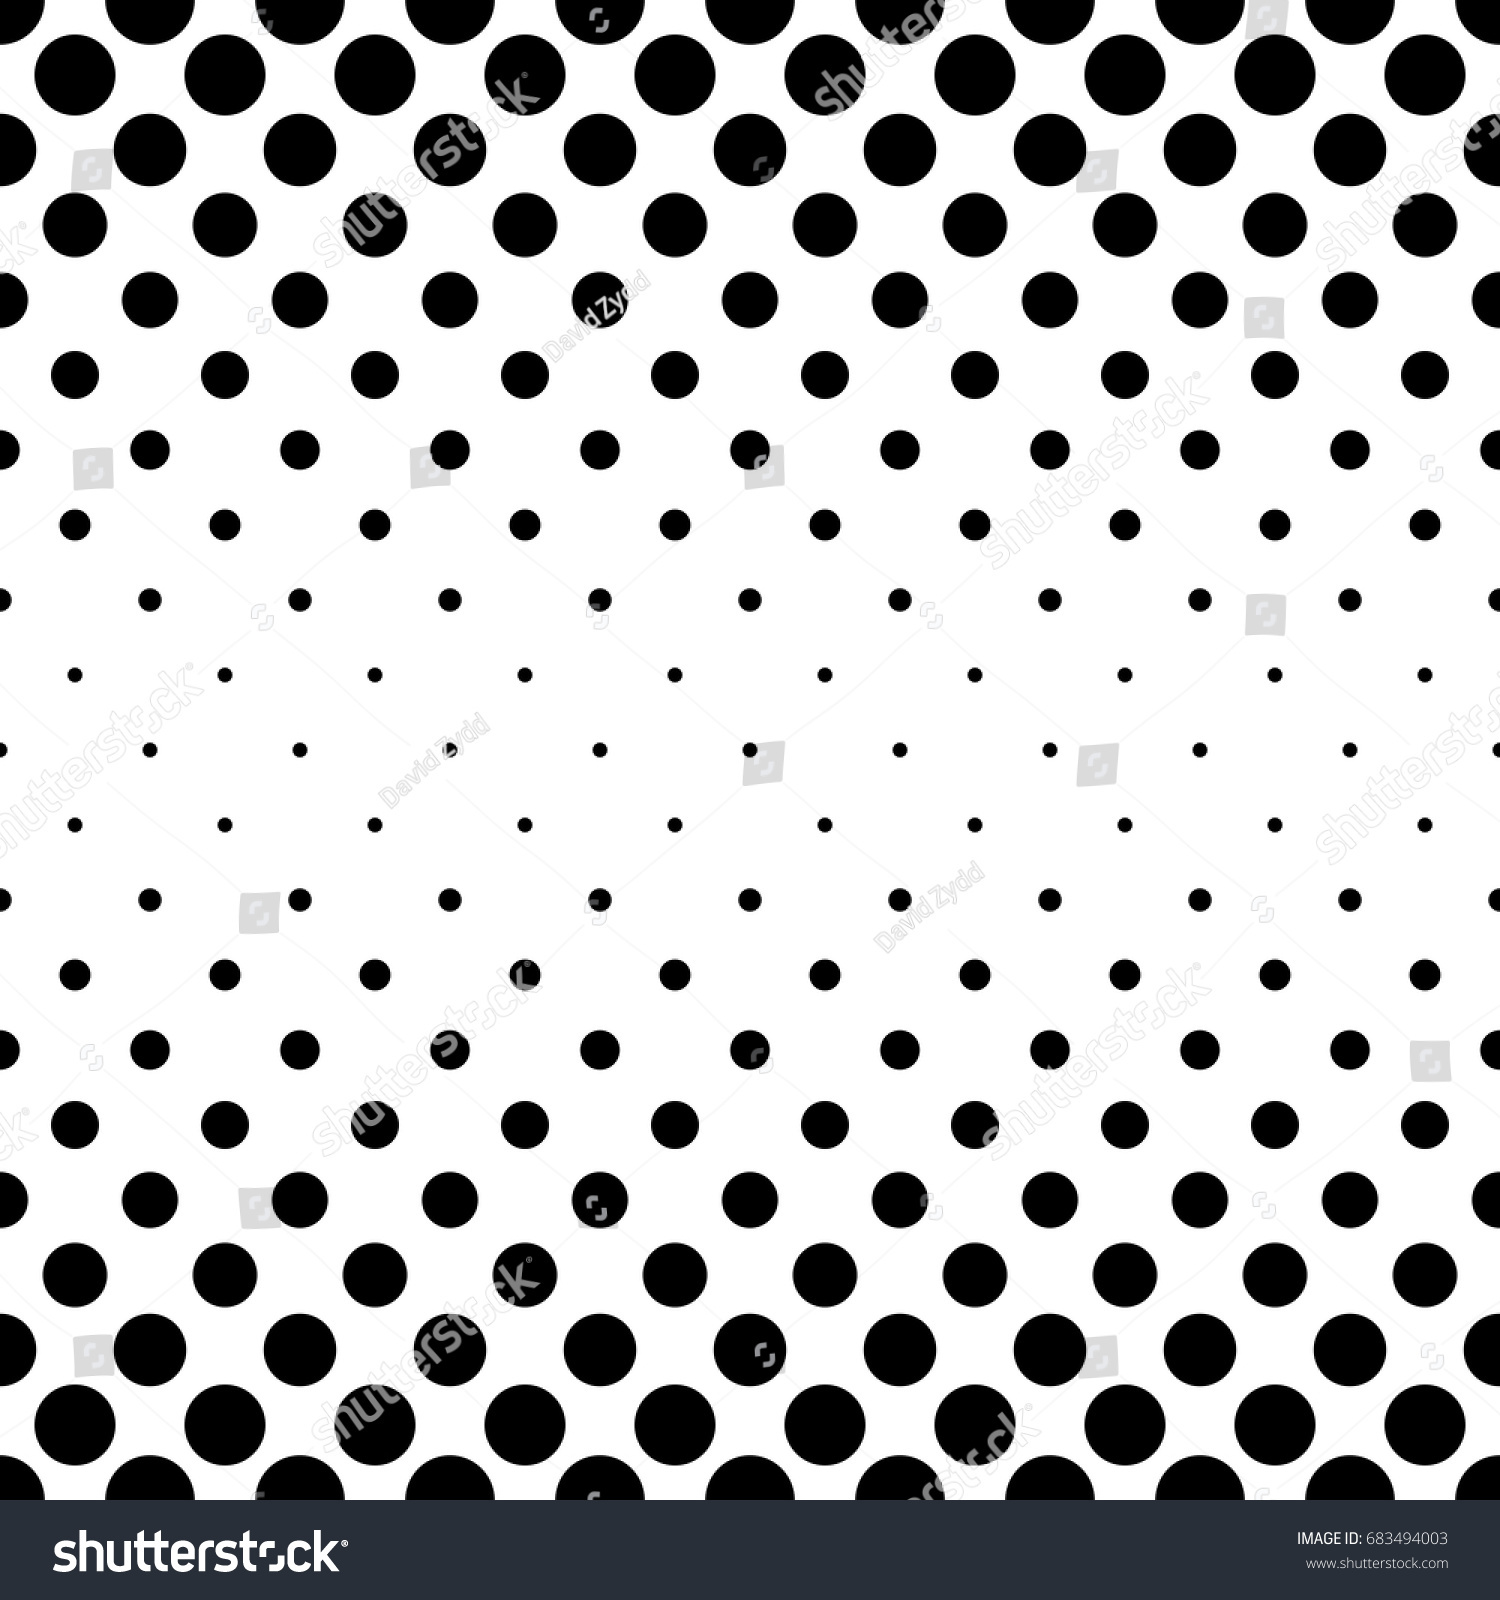 Abstract Black White Dot Pattern Halftone Stock Vector Royalty Free